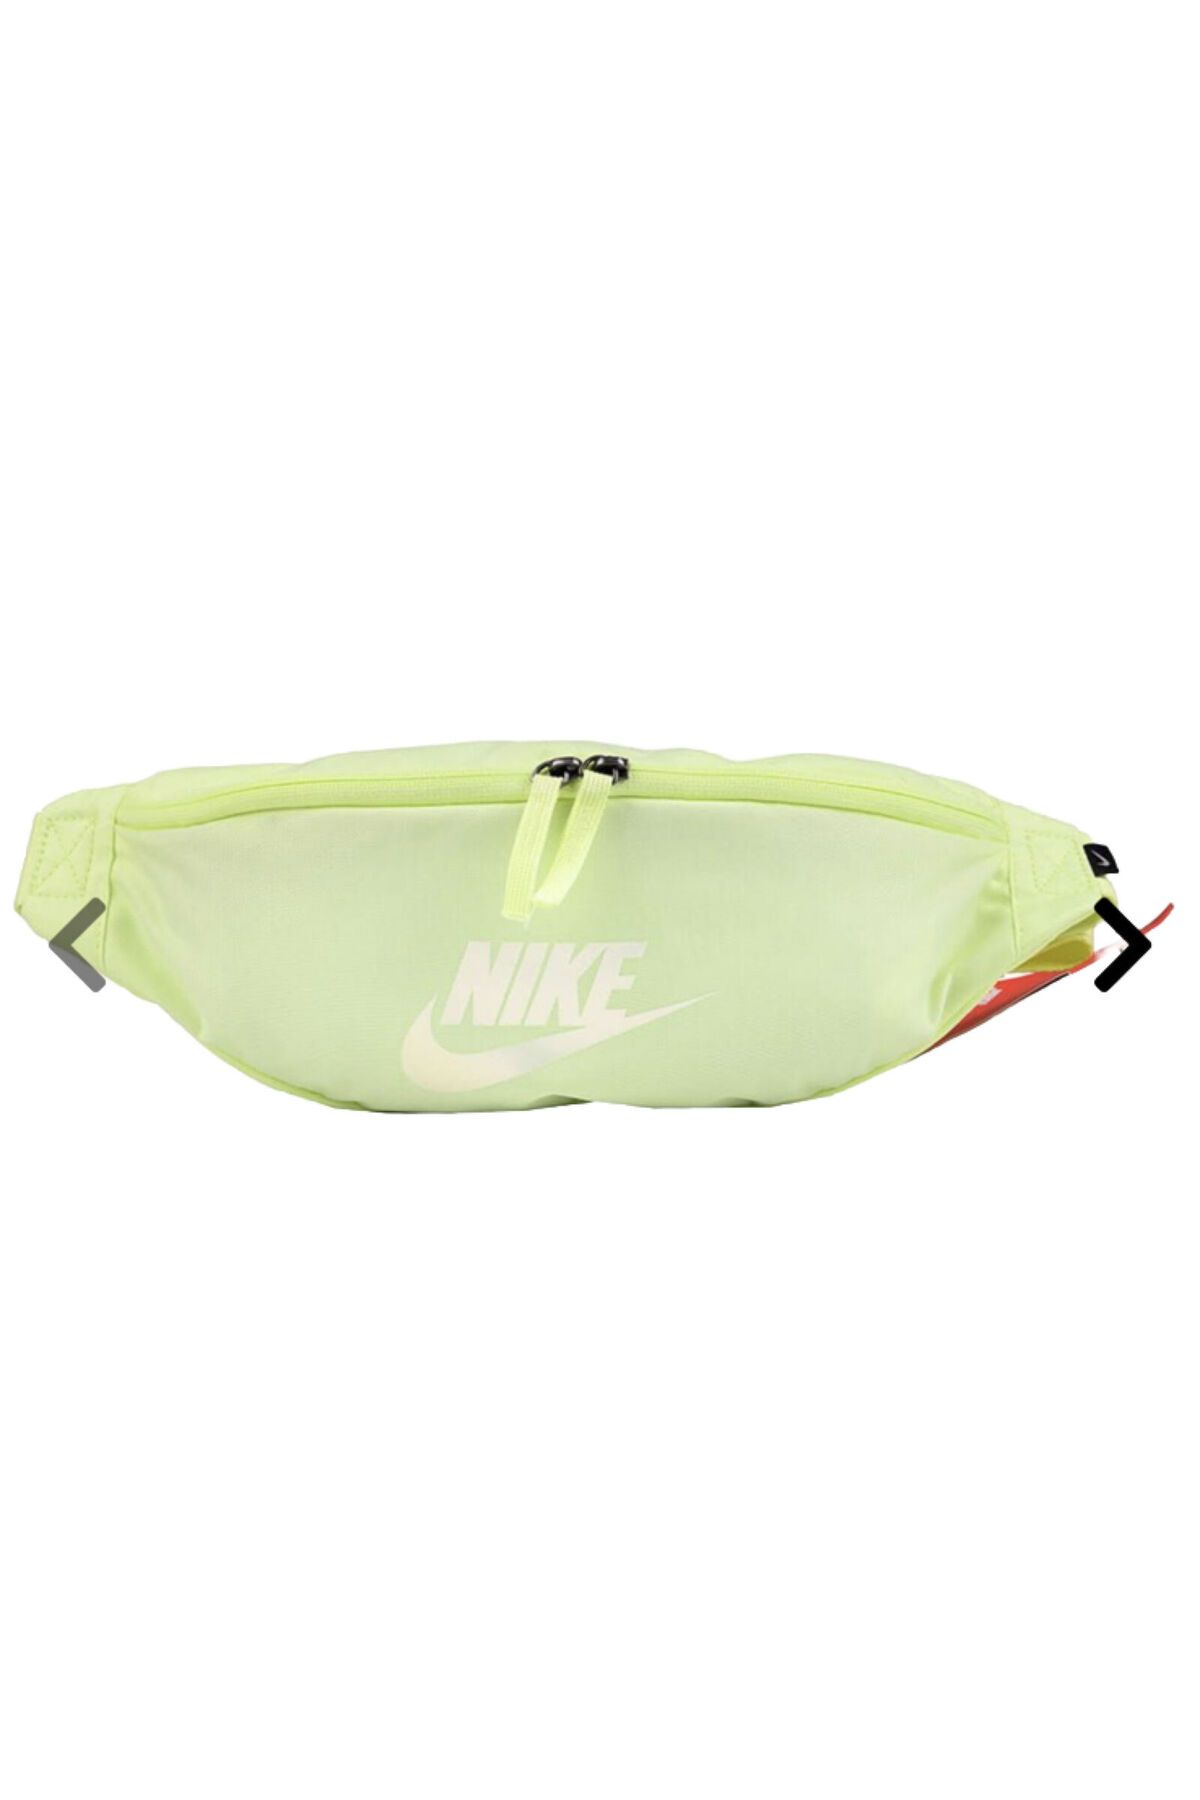 Nike Challenger 2.0 Waist Pack Large - Top4Running.ie